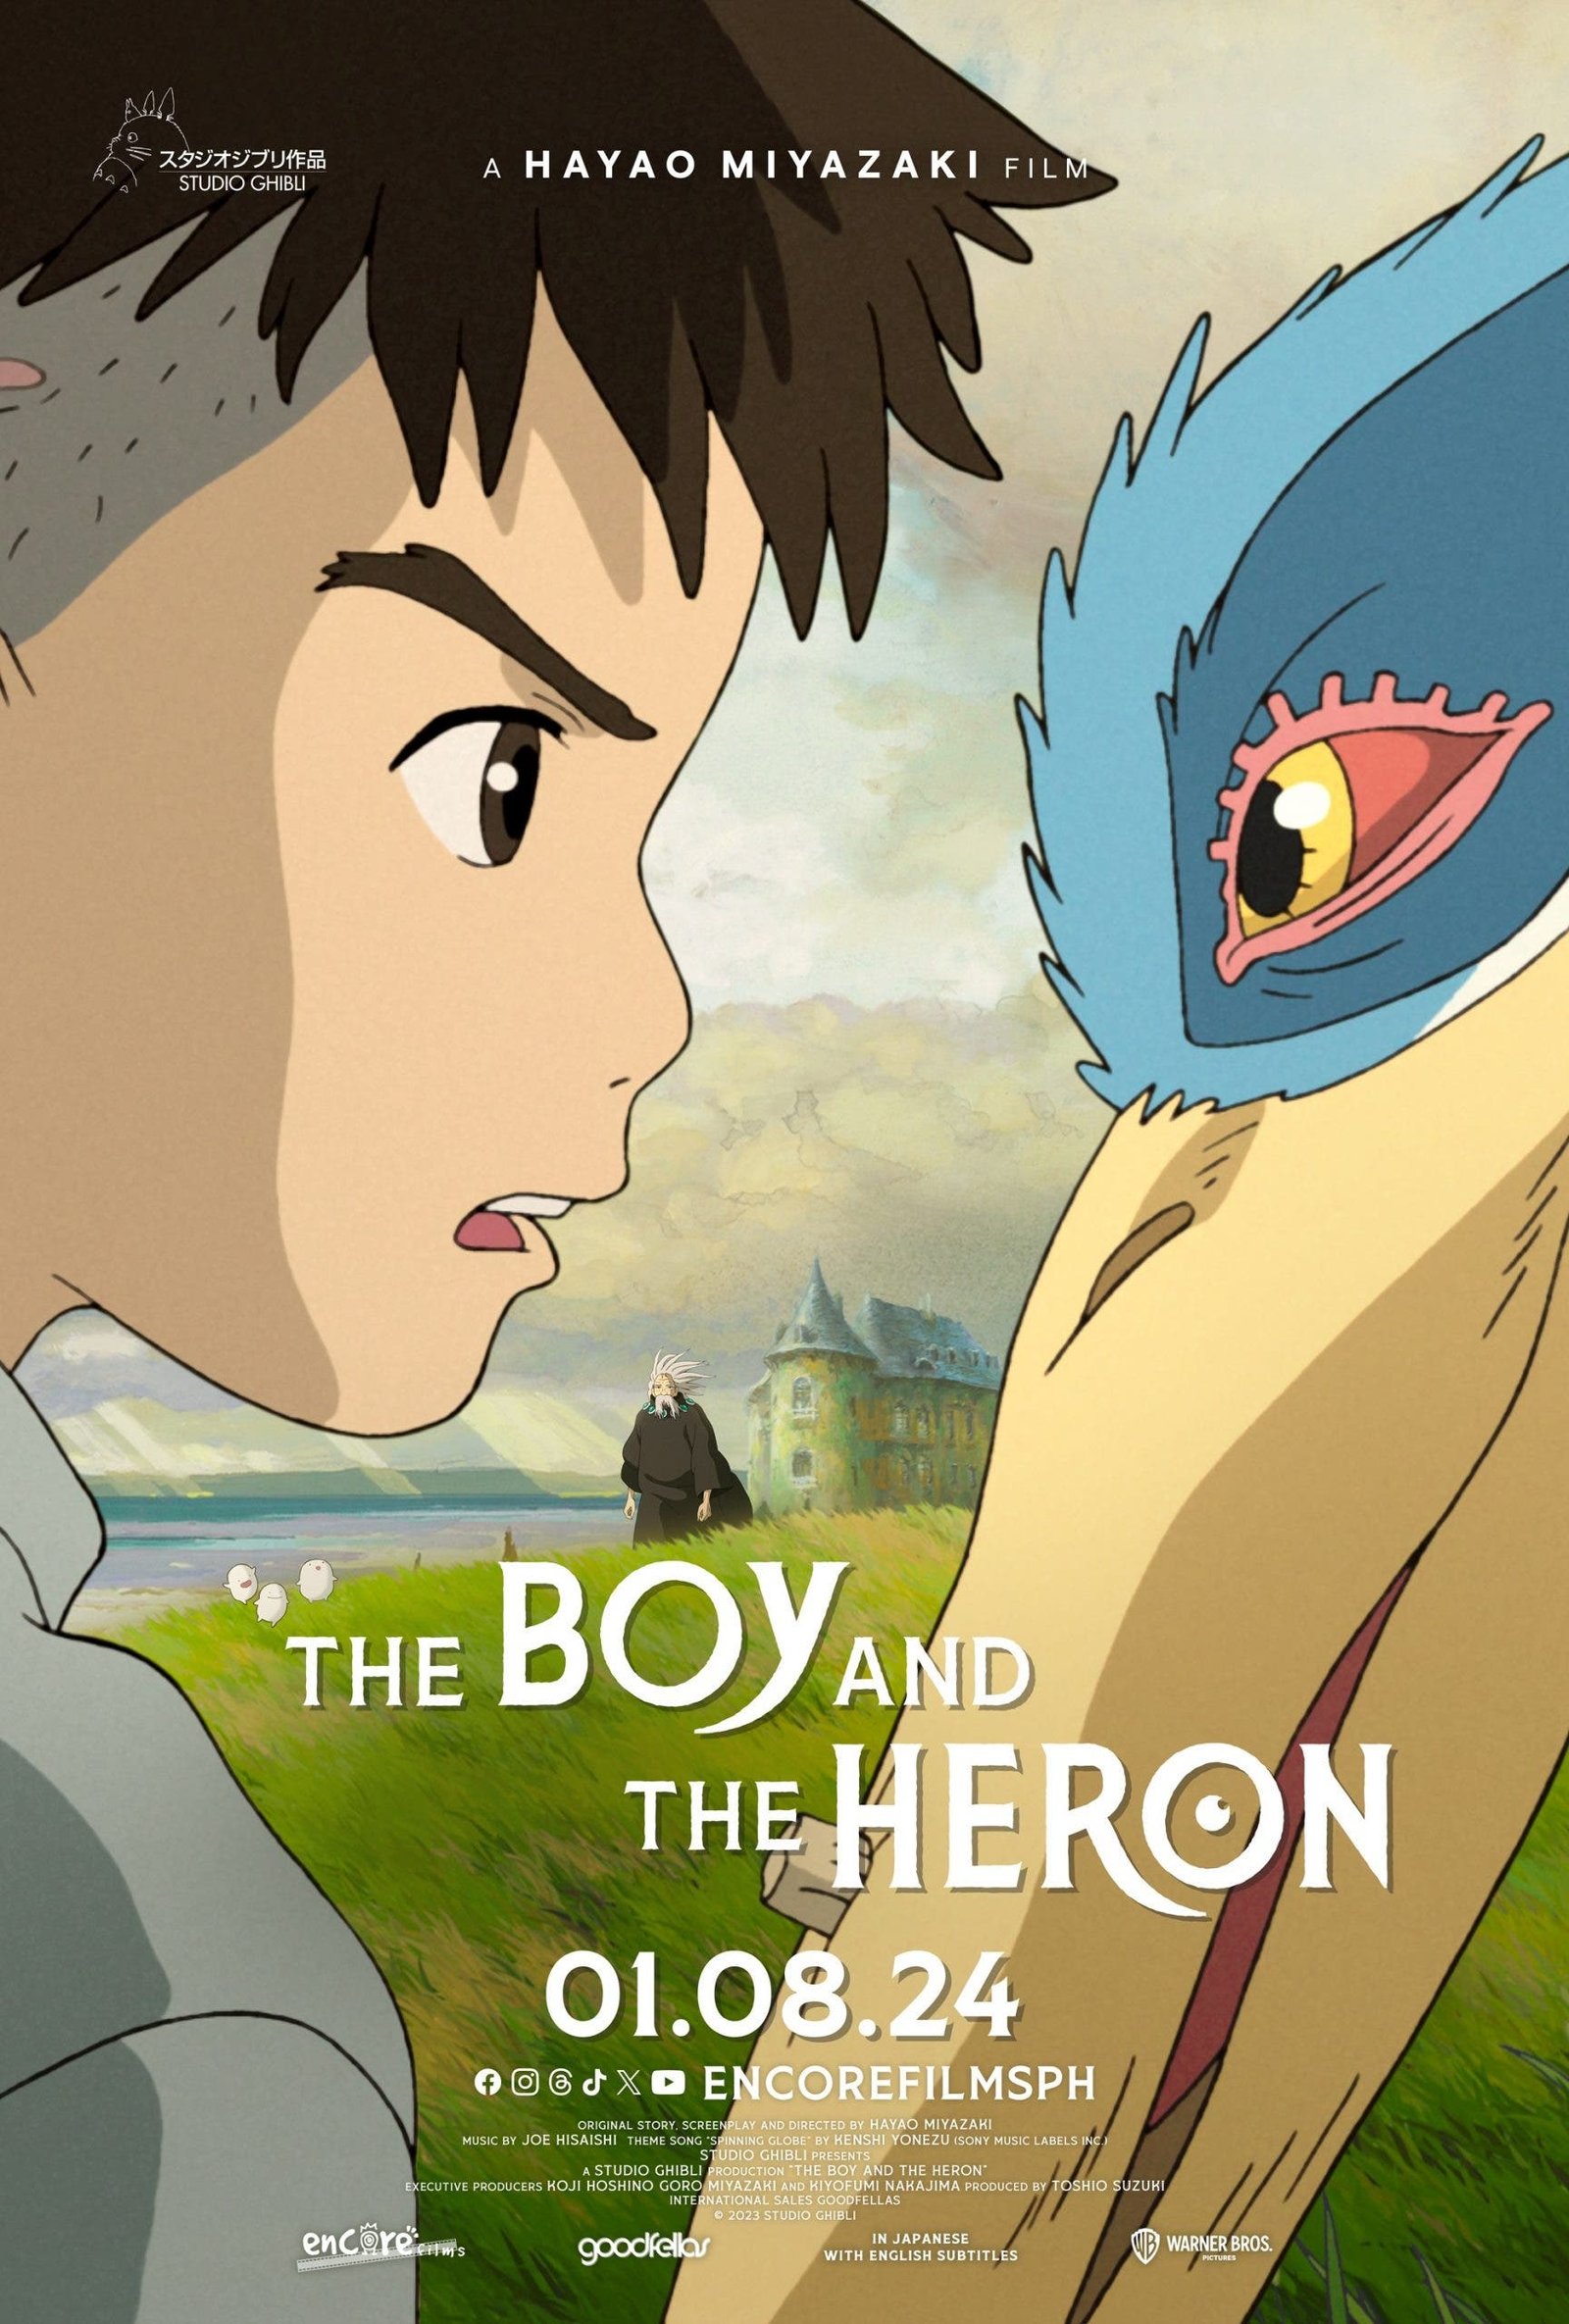 English-Dubbed Versions of ‘The Boy and the Heron’ Available in PH Cinemas on Jan 8